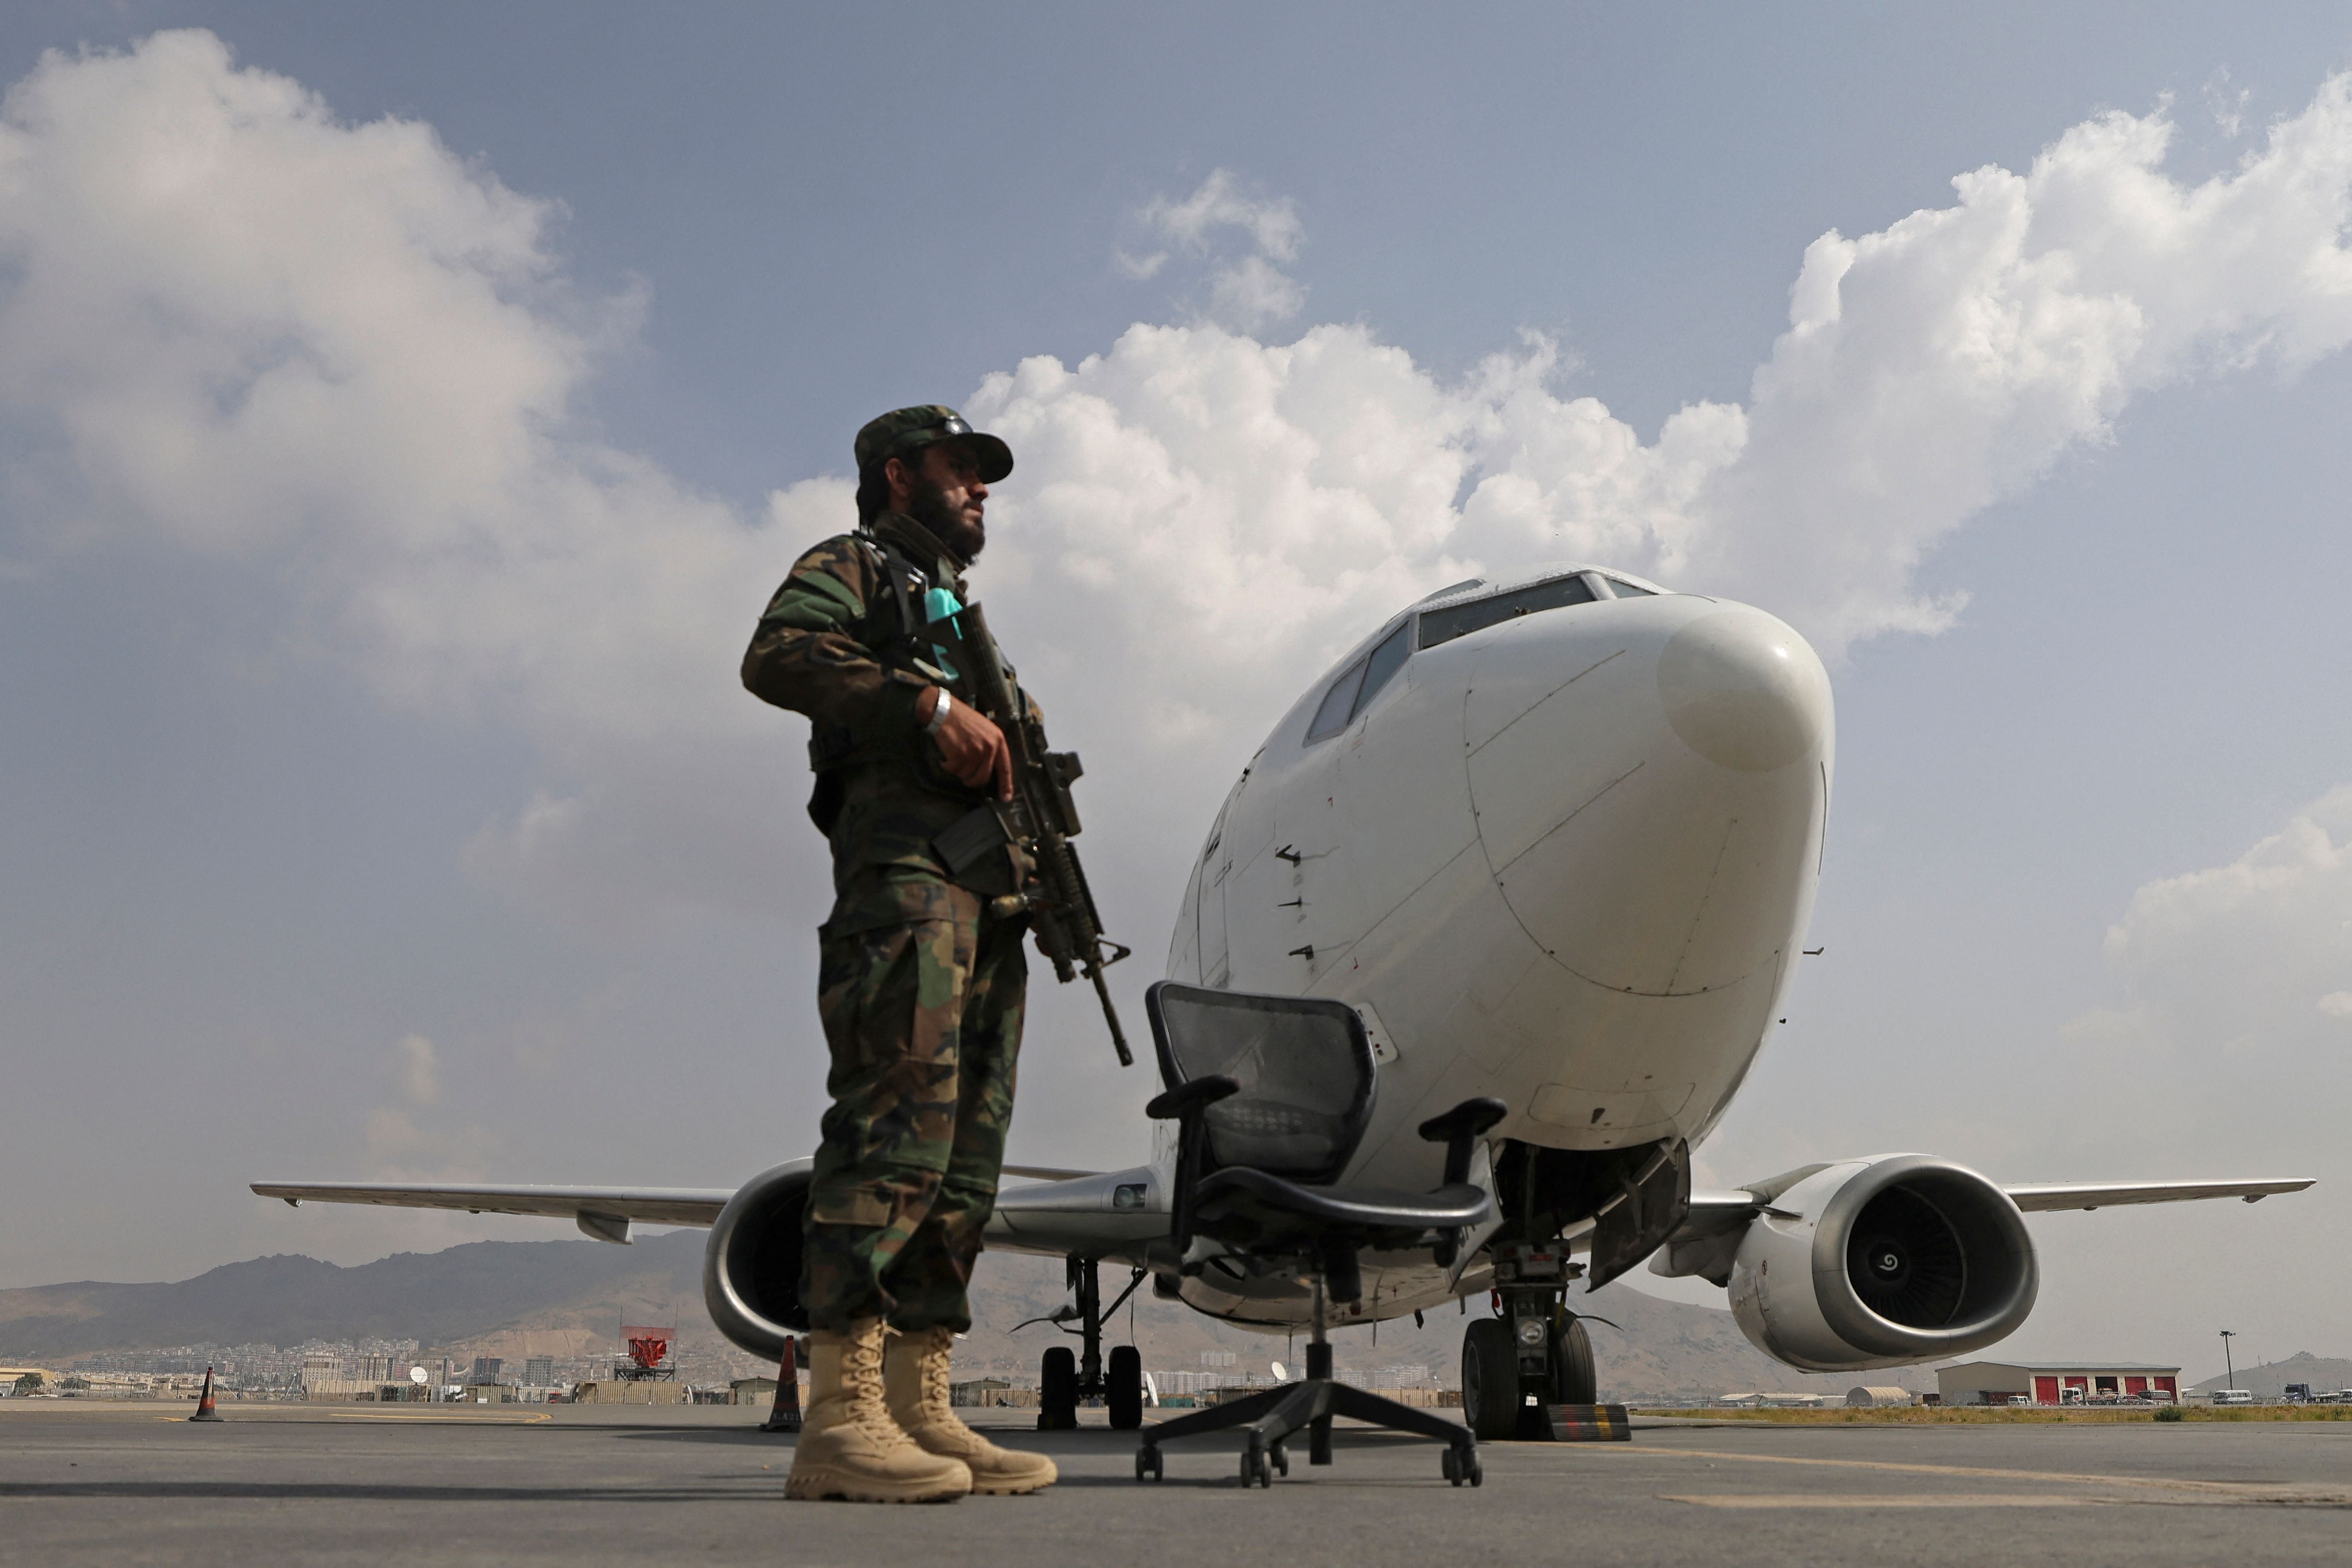 A Taliban fighter stands guard next to an Ariana Afghan Airlines aircraft on the tarmac at the airport in Kabul